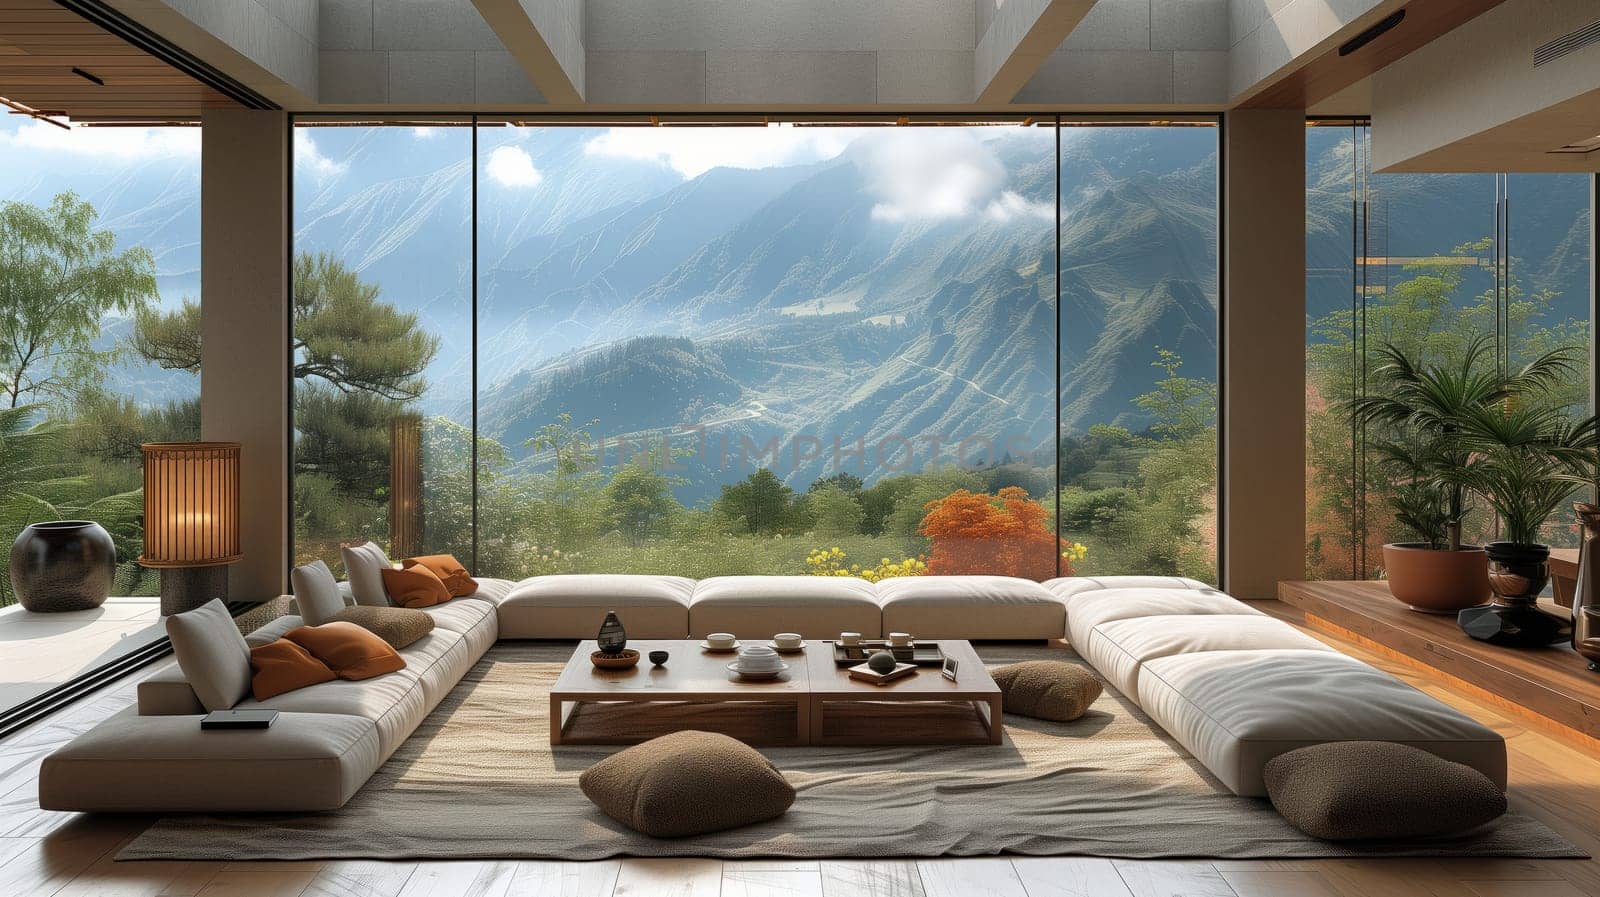 A cozy living room with numerous windows offering a stunning view of the mountains. The space is filled with plants, wood furniture, and ample natural light